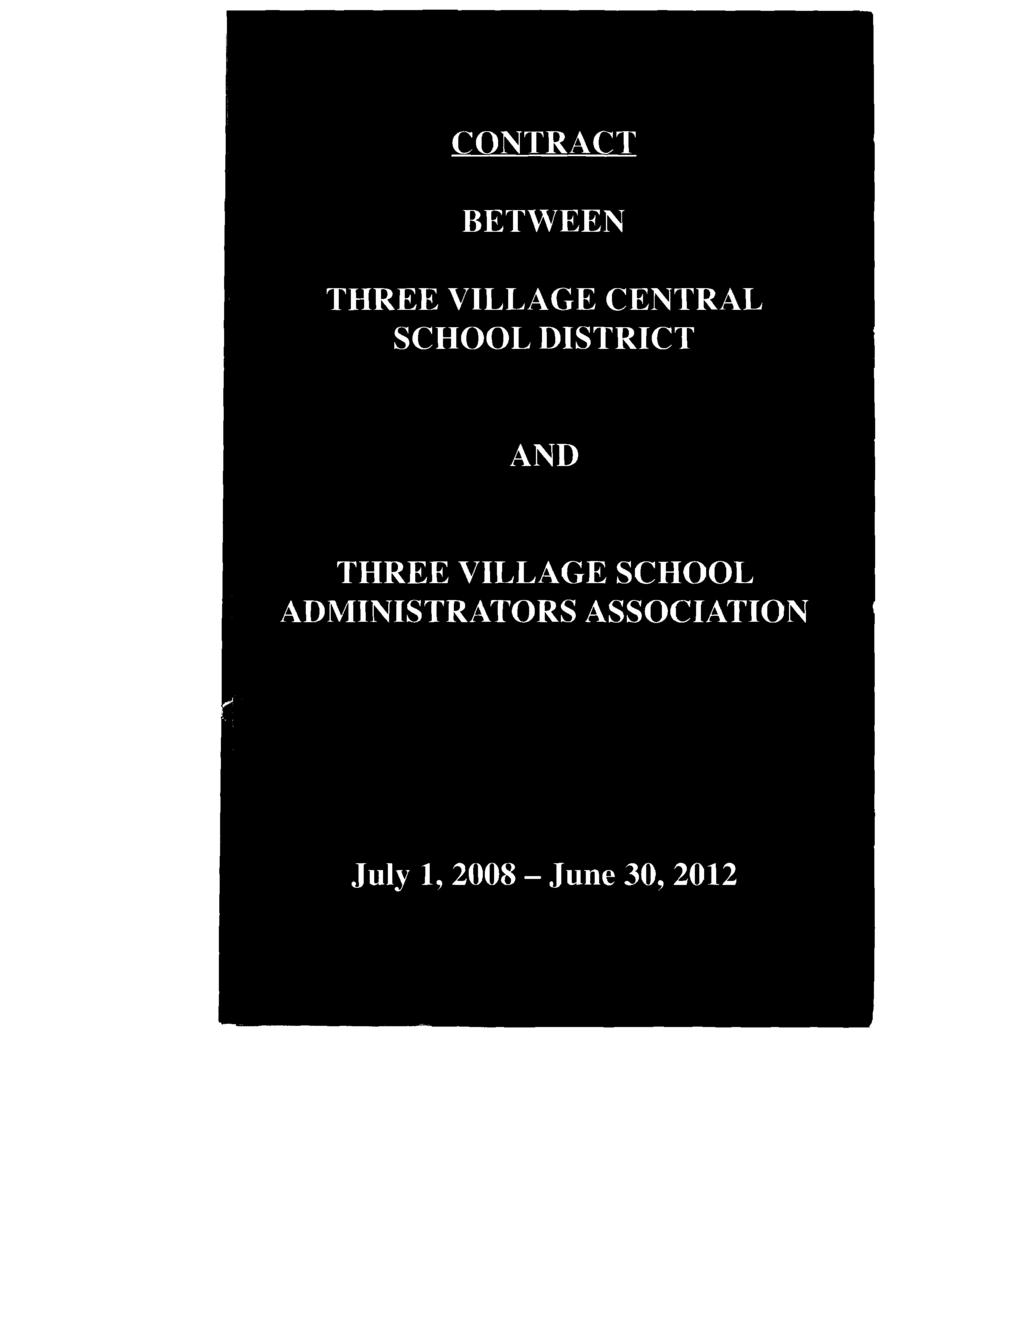 CONTRACT BETWEEN THREE VILLAGE CENTRAL SCHOOL DISTRICT AND THREE